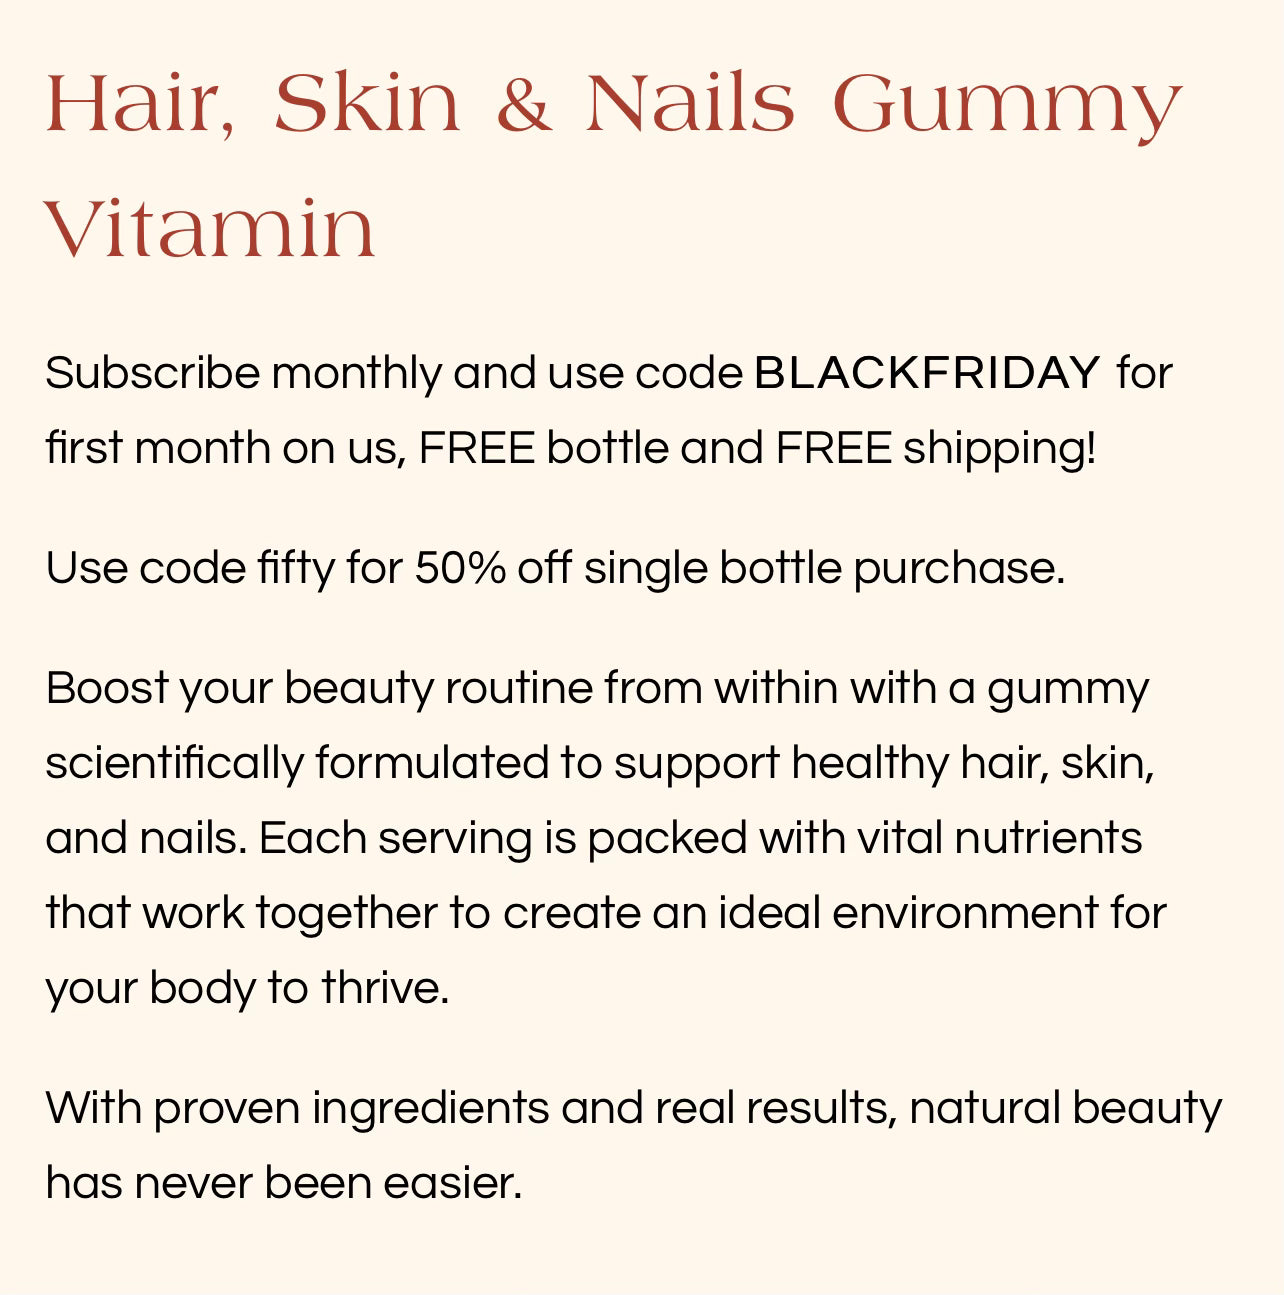 Subscribe and enter code FREE to receive a FREE BOTTLE!